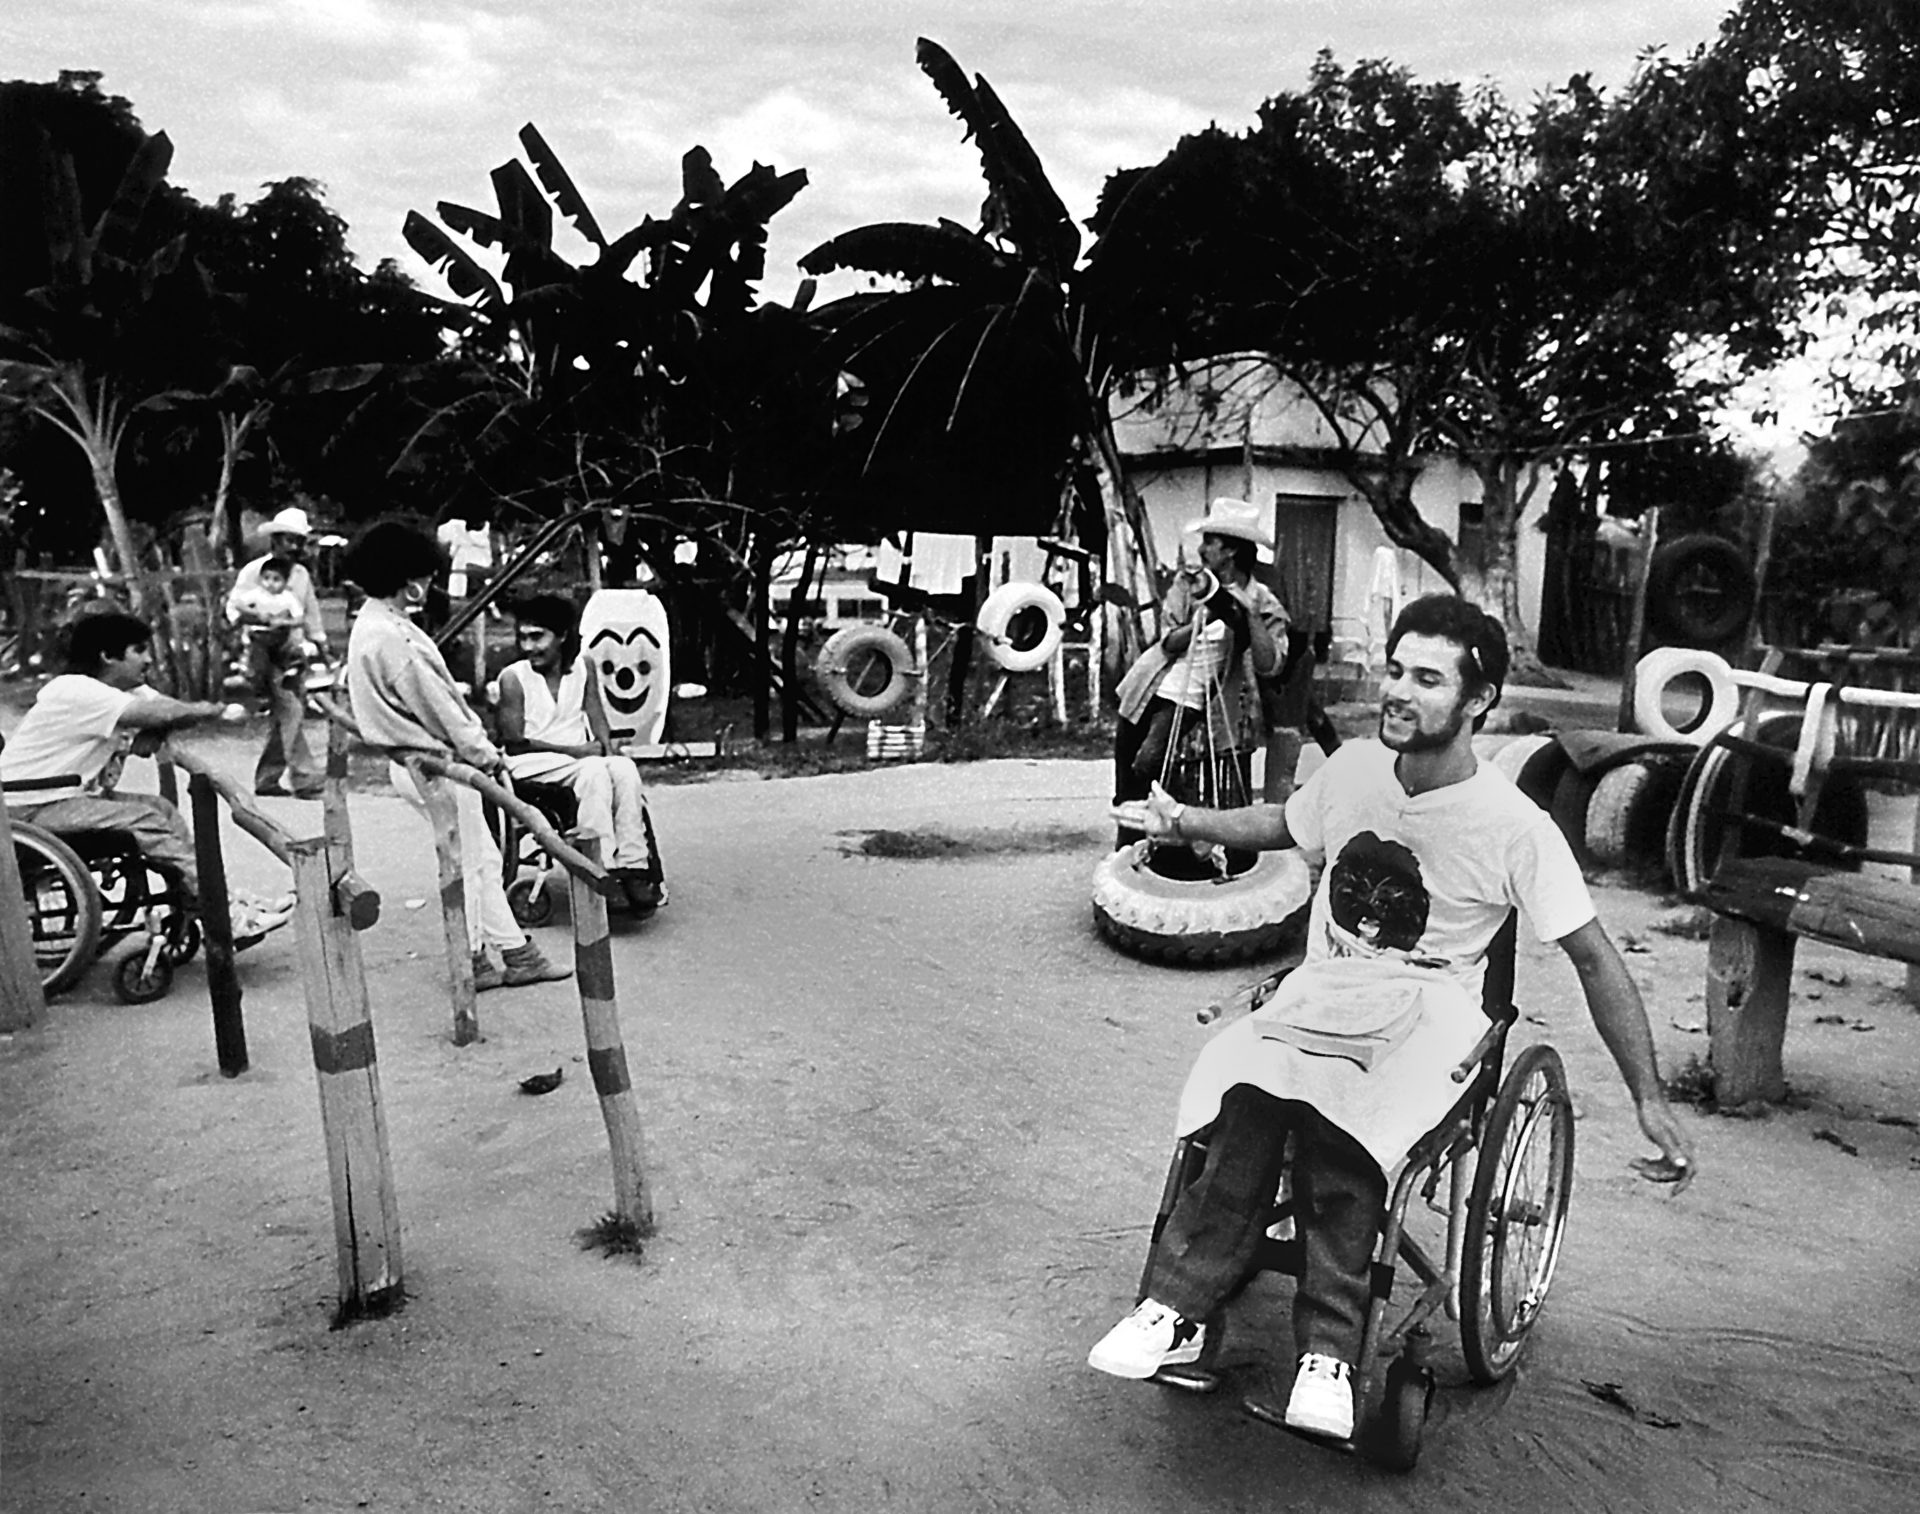 At dusk, the playground fills with people dacing on their feet or in wheelchairs—a carnival gone a bit mad in the fine tradition of the Mexican surrealists.